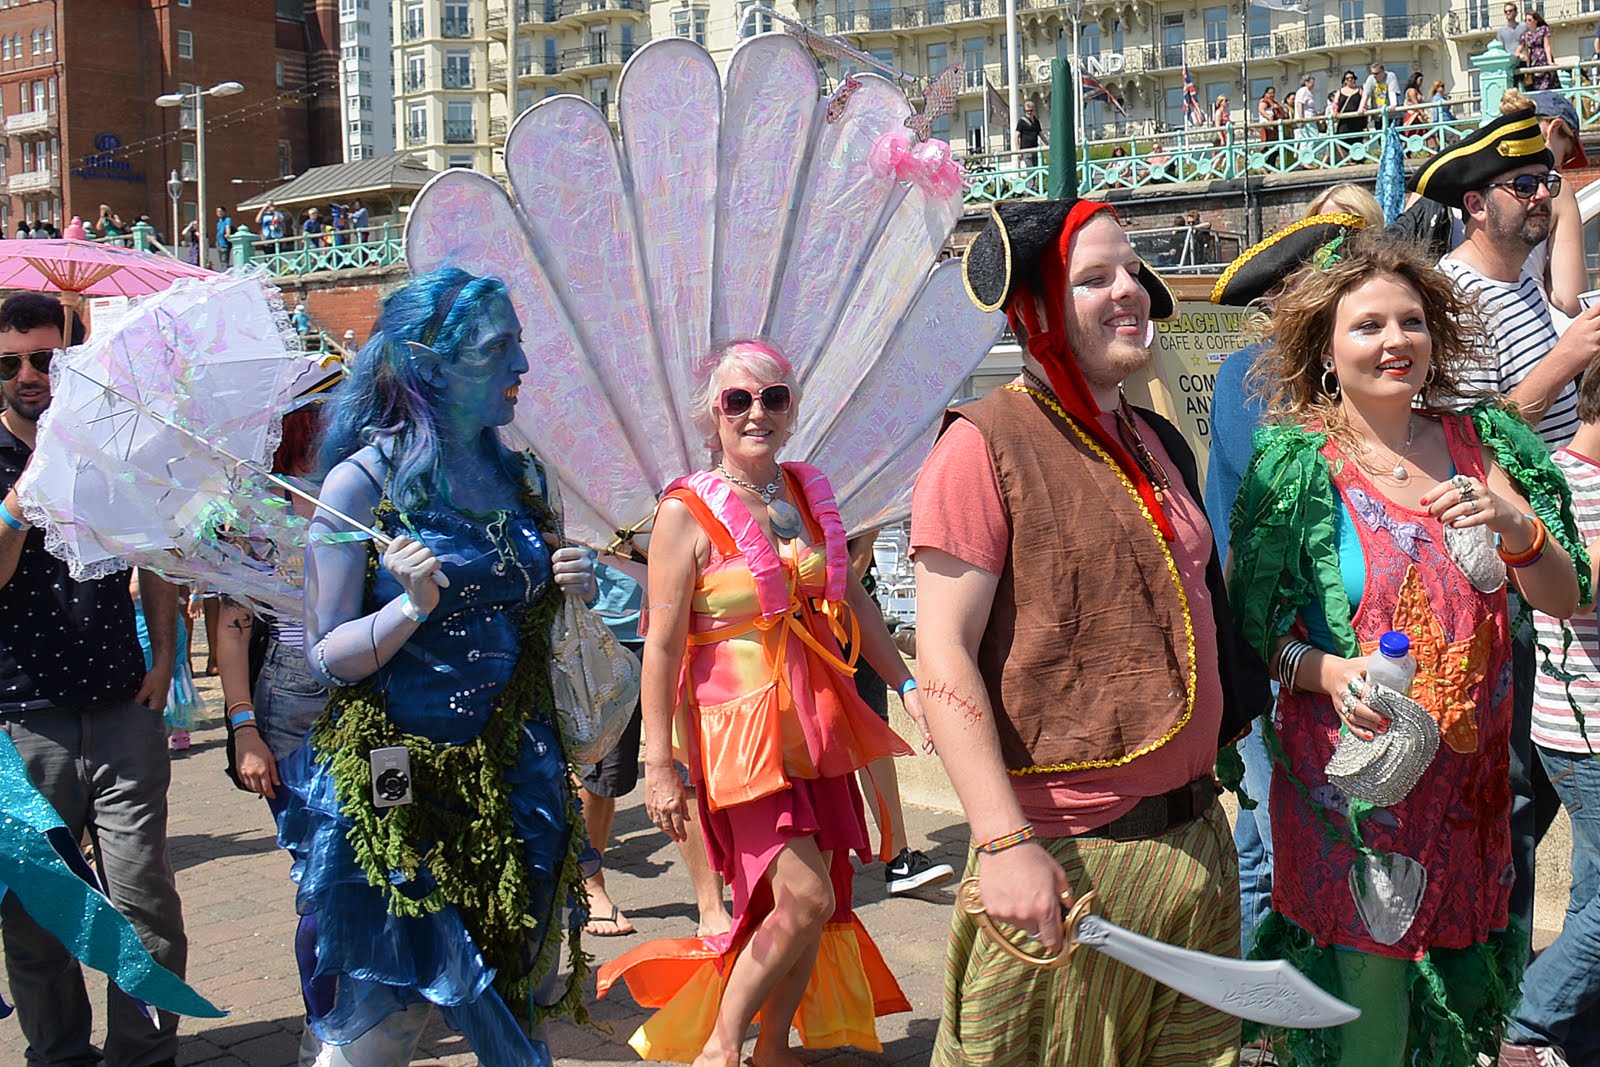 March of the Mermaids | Community Events, City Insights | My Brighton ...